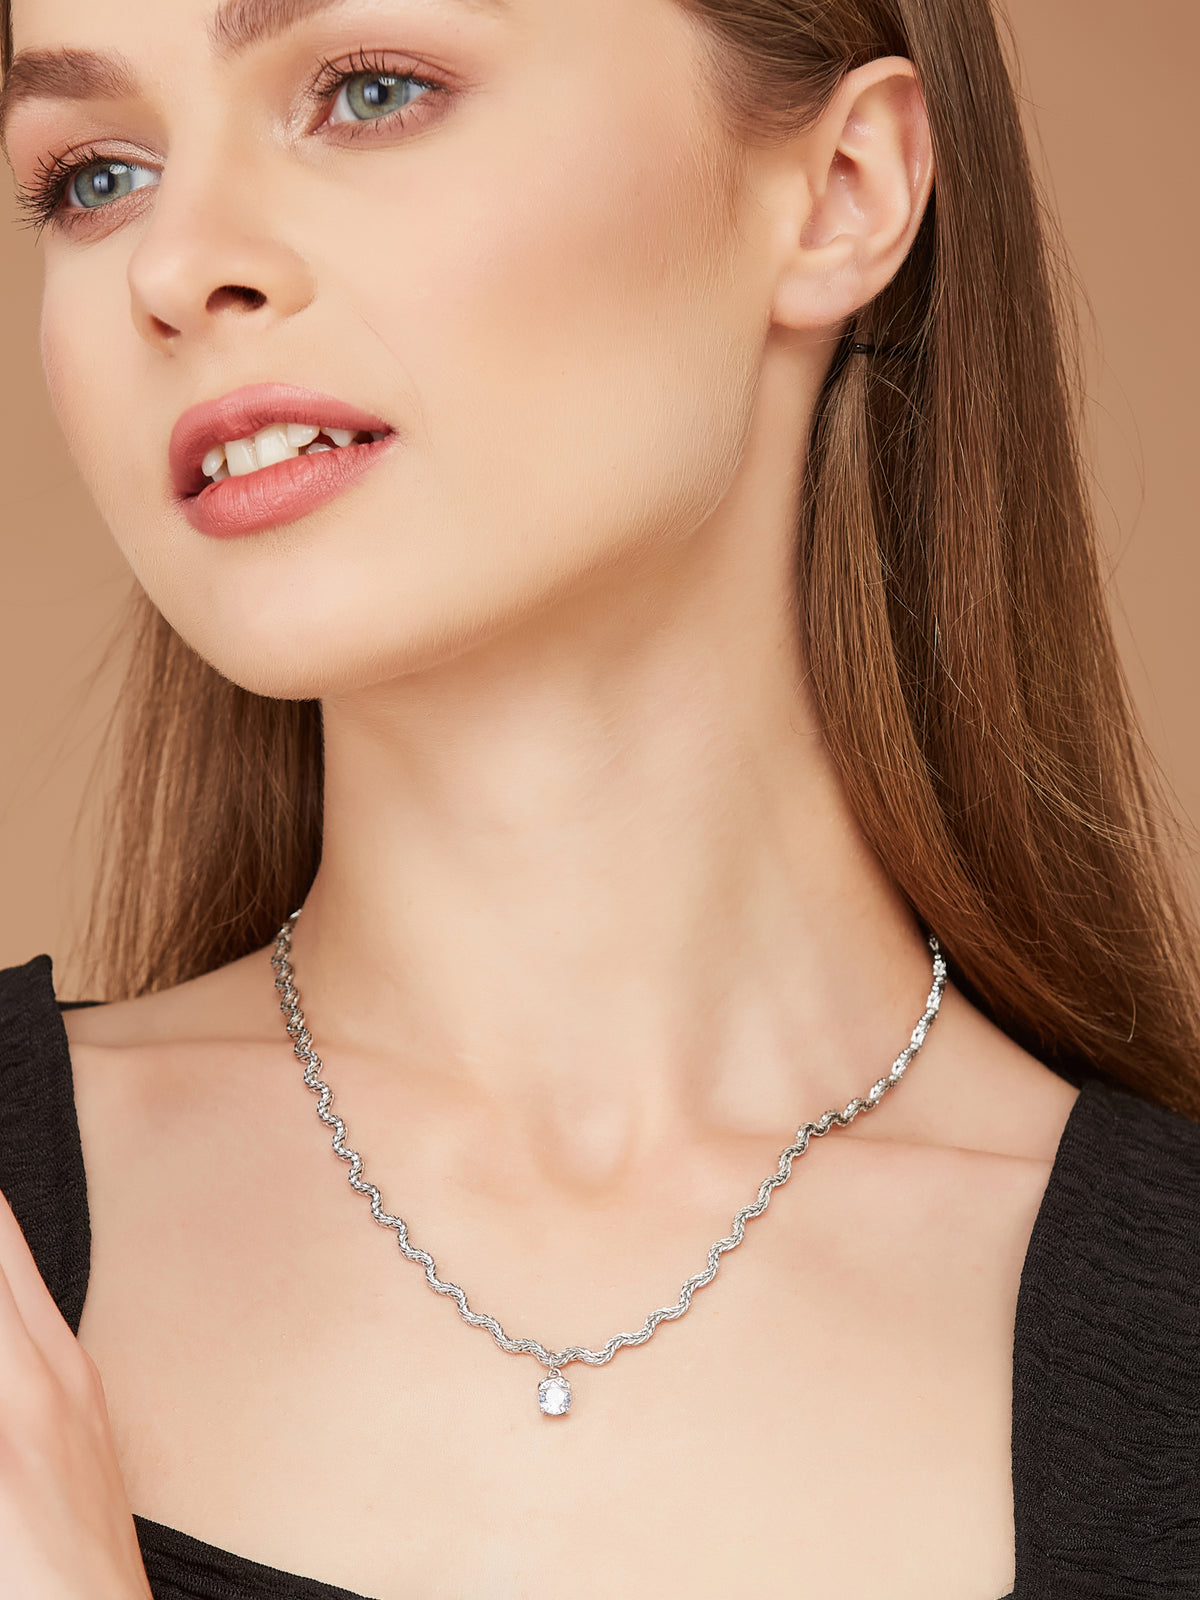 Lightweight Silver Plated Necklace for women & girls